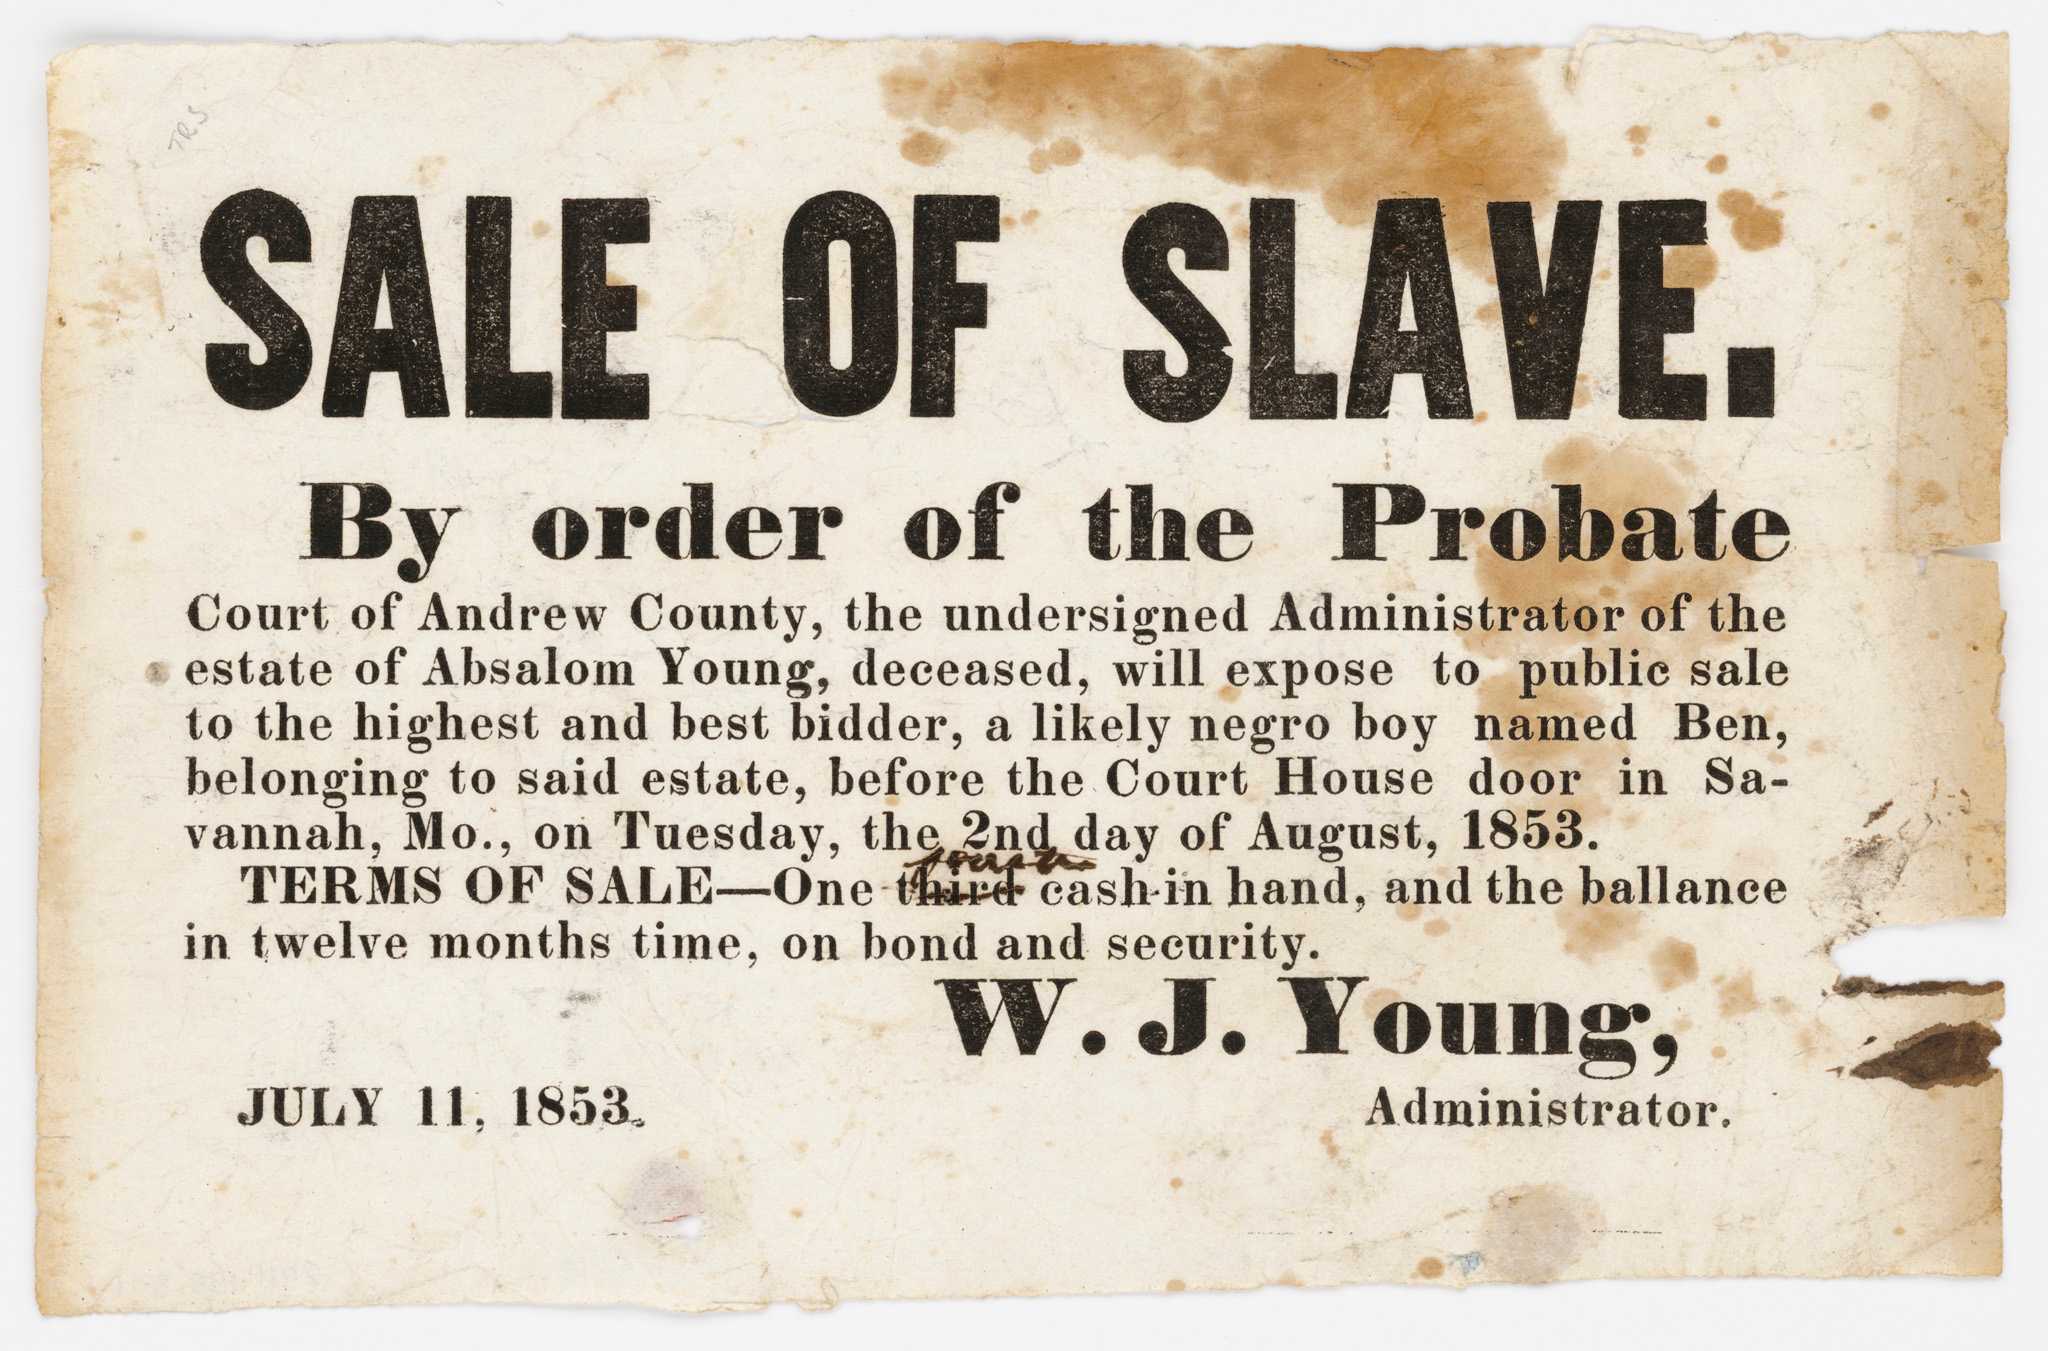 A single-sided, single page broadside of black text printed on white paper advertising the sale of an enslaved boy named Ben. At the top, in large text: [SALE OF SLAVE. / By order of the Probate]. The document continues, [Court of Andrew County, the undersigned Administrator of the estate of Absalom Young, deceased, will expose to public sale to the highest and best bidder, a likely negro boy named Ben, belonging to said estate, before the Court House door in Savannah, Mo., on Tuesday, the 2nd day of August, 1853. TERMS OF SALE - One third cash in hand, and the ballance in twelve months time, on bond and security]. The "third" has been struck by hand and [fourth] written in. At the bottom is [W.J. Young, Administrator.] and the date [July 11, 1853].